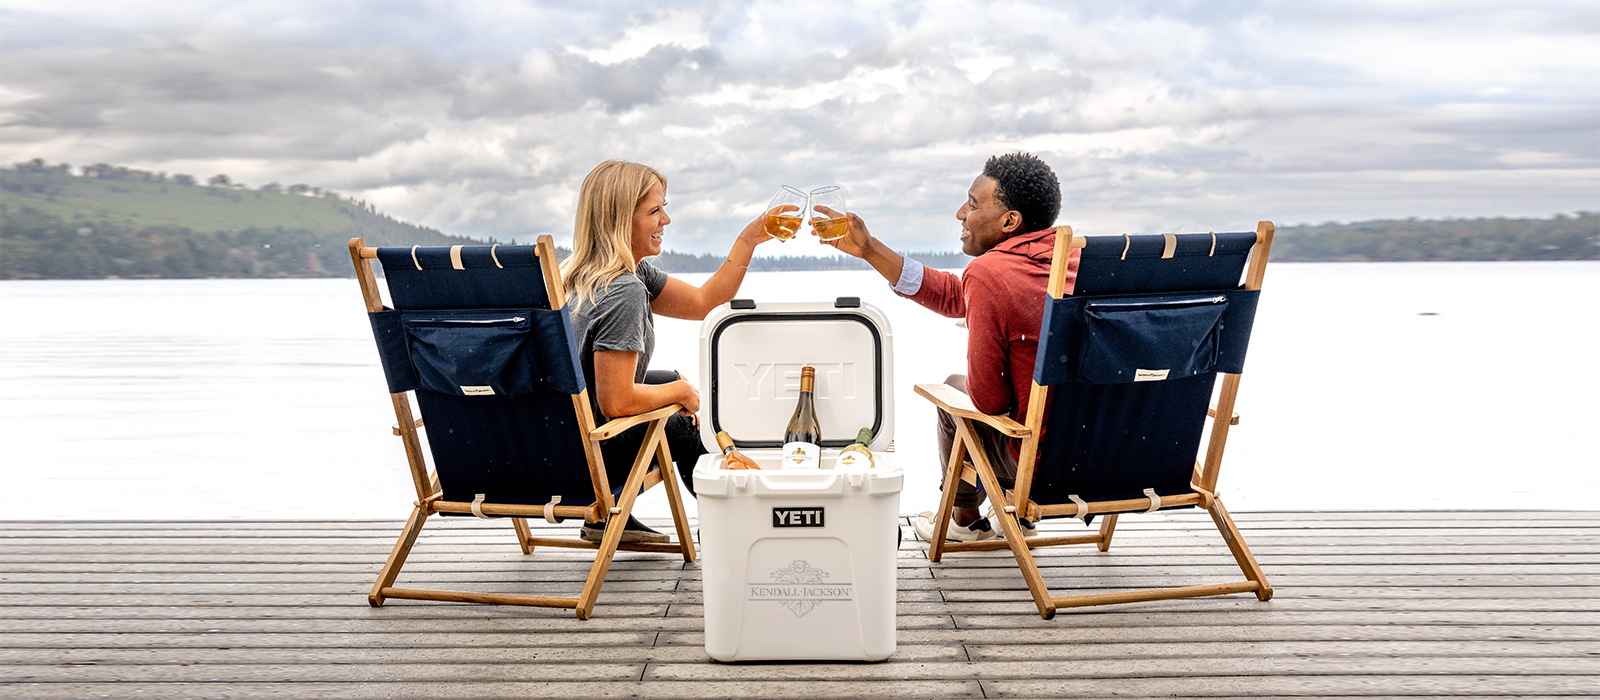 Kendall-Jackson x YETI: cheers on the dock at the lake